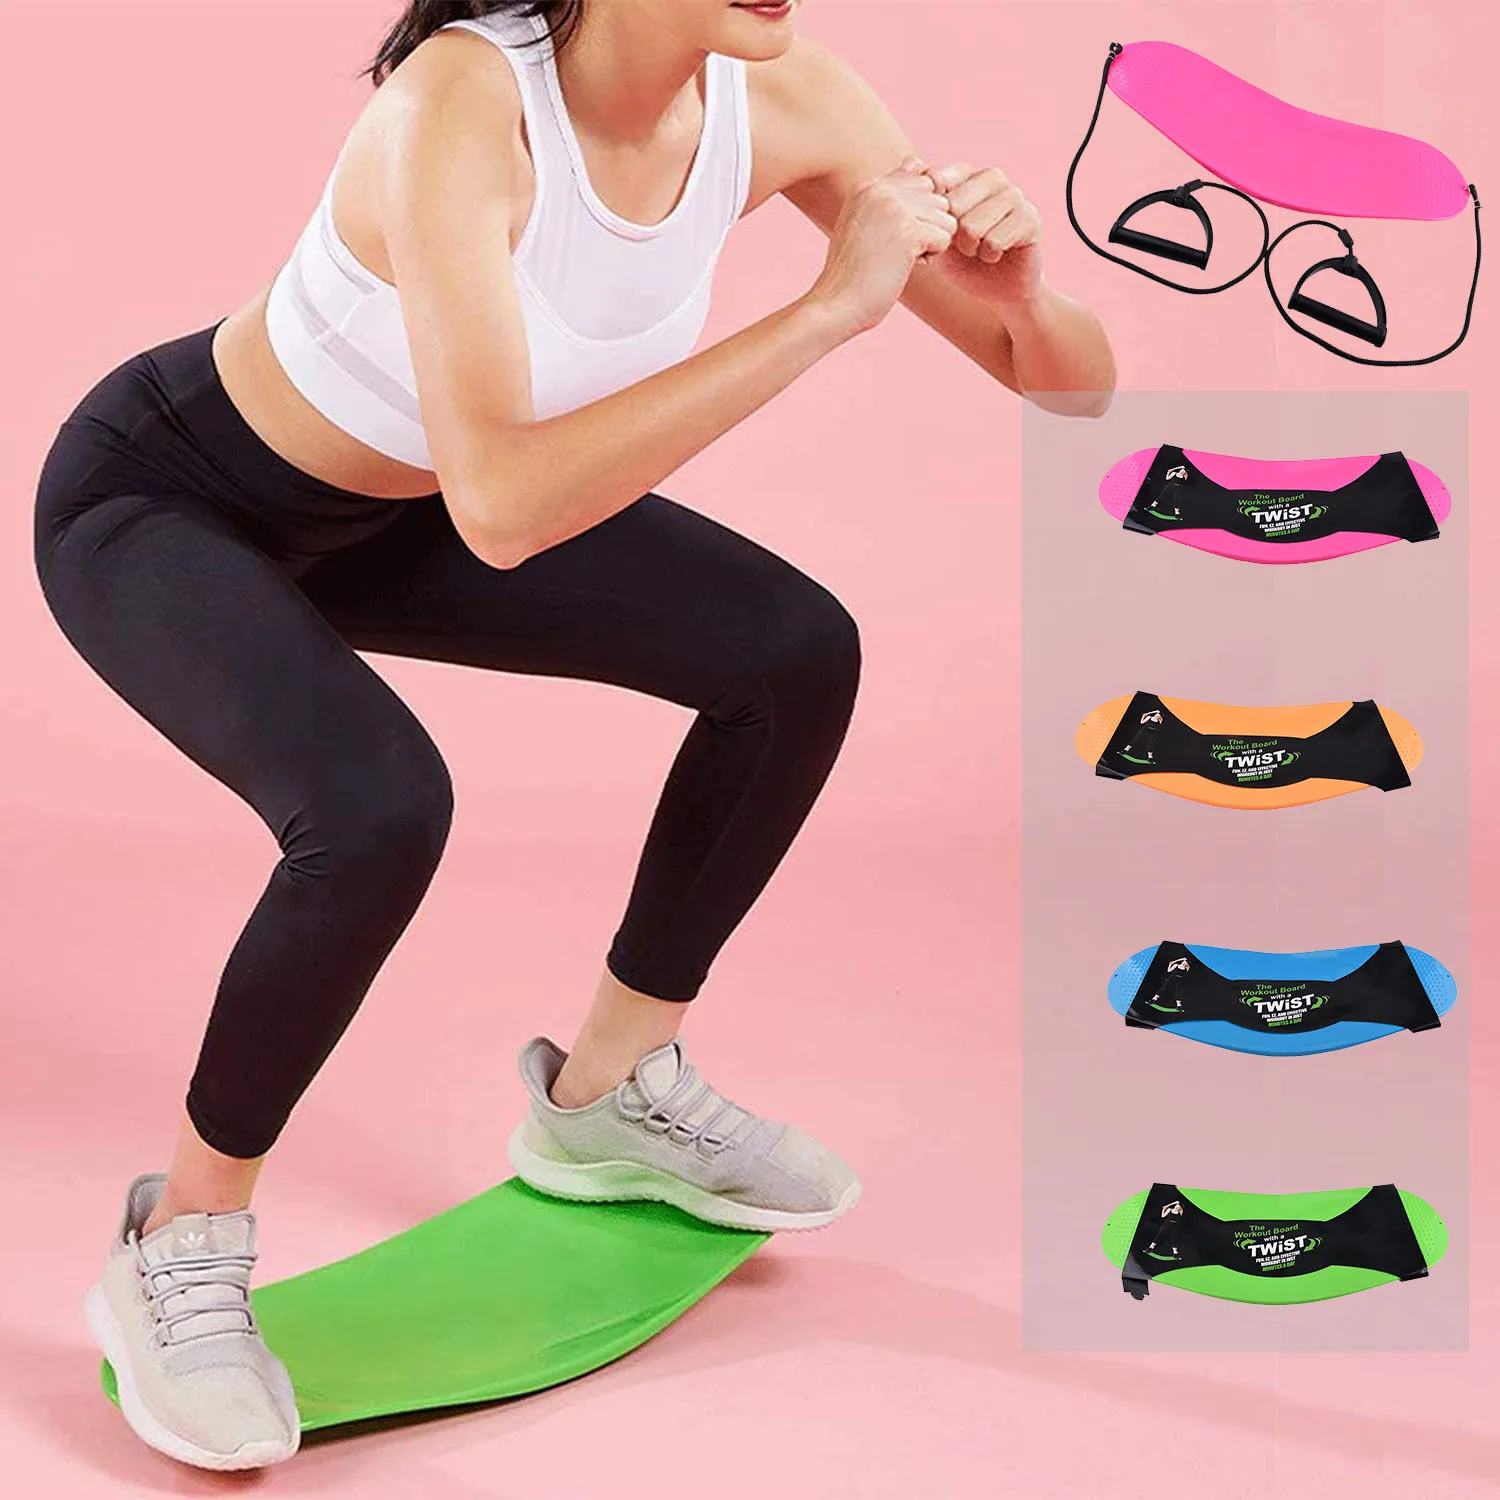 ABS Toner Twisting Fitness Balance Board Unisex Workout Muscles Gym Yoga 